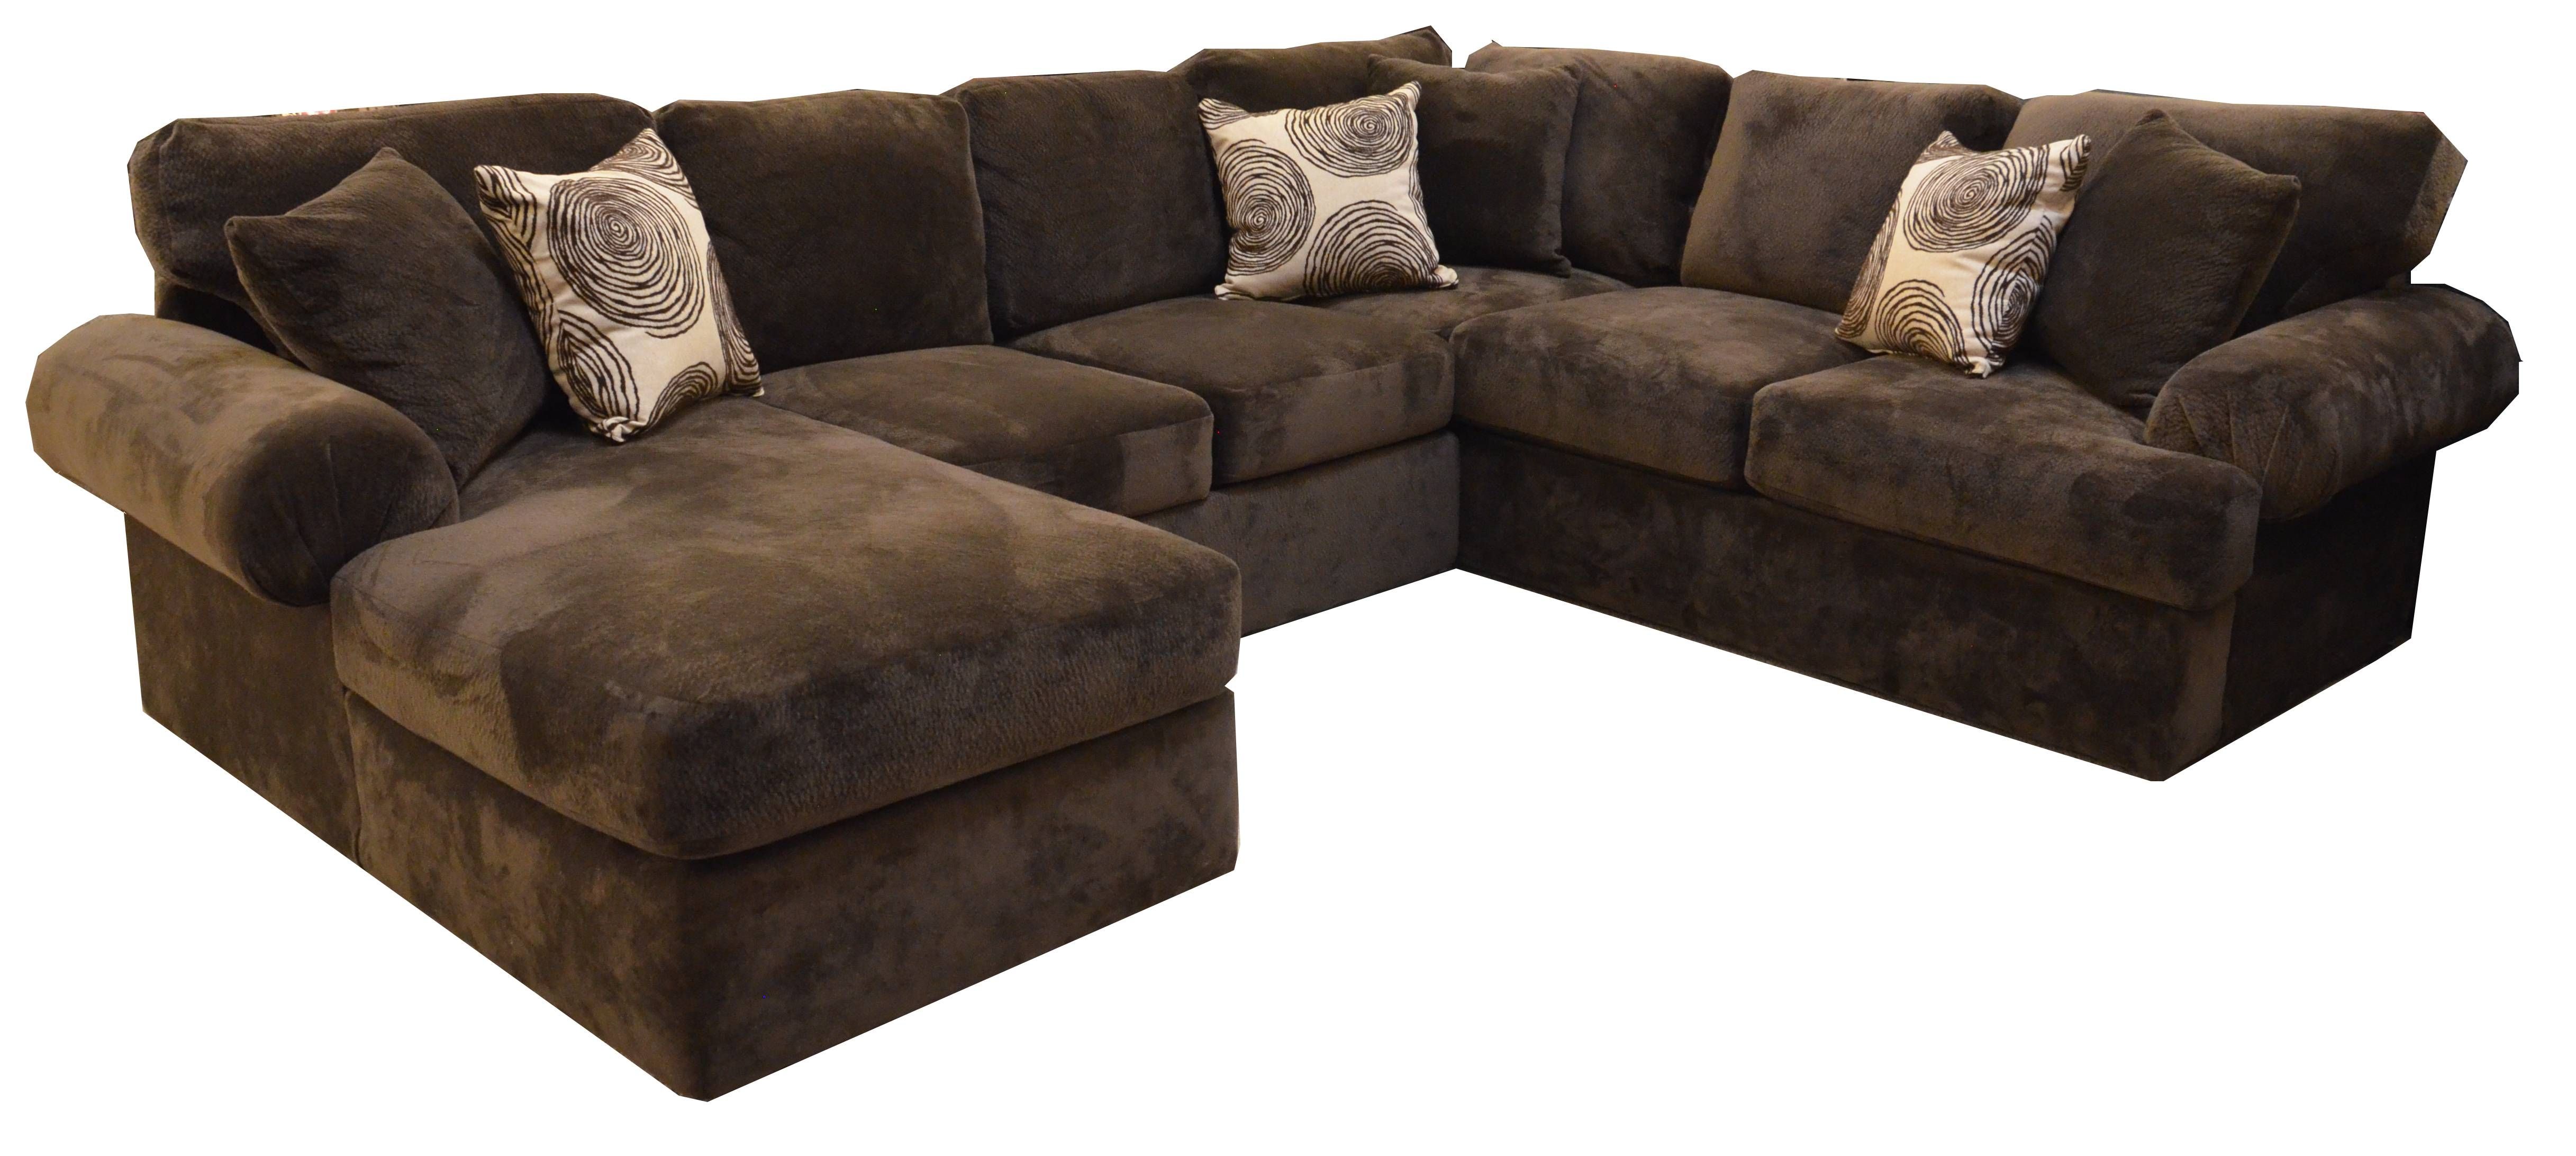 Sofas Center : Seat Sectional Sofa Phenomenal Image Ideas With Bradley Sectional Sofa (View 6 of 30)